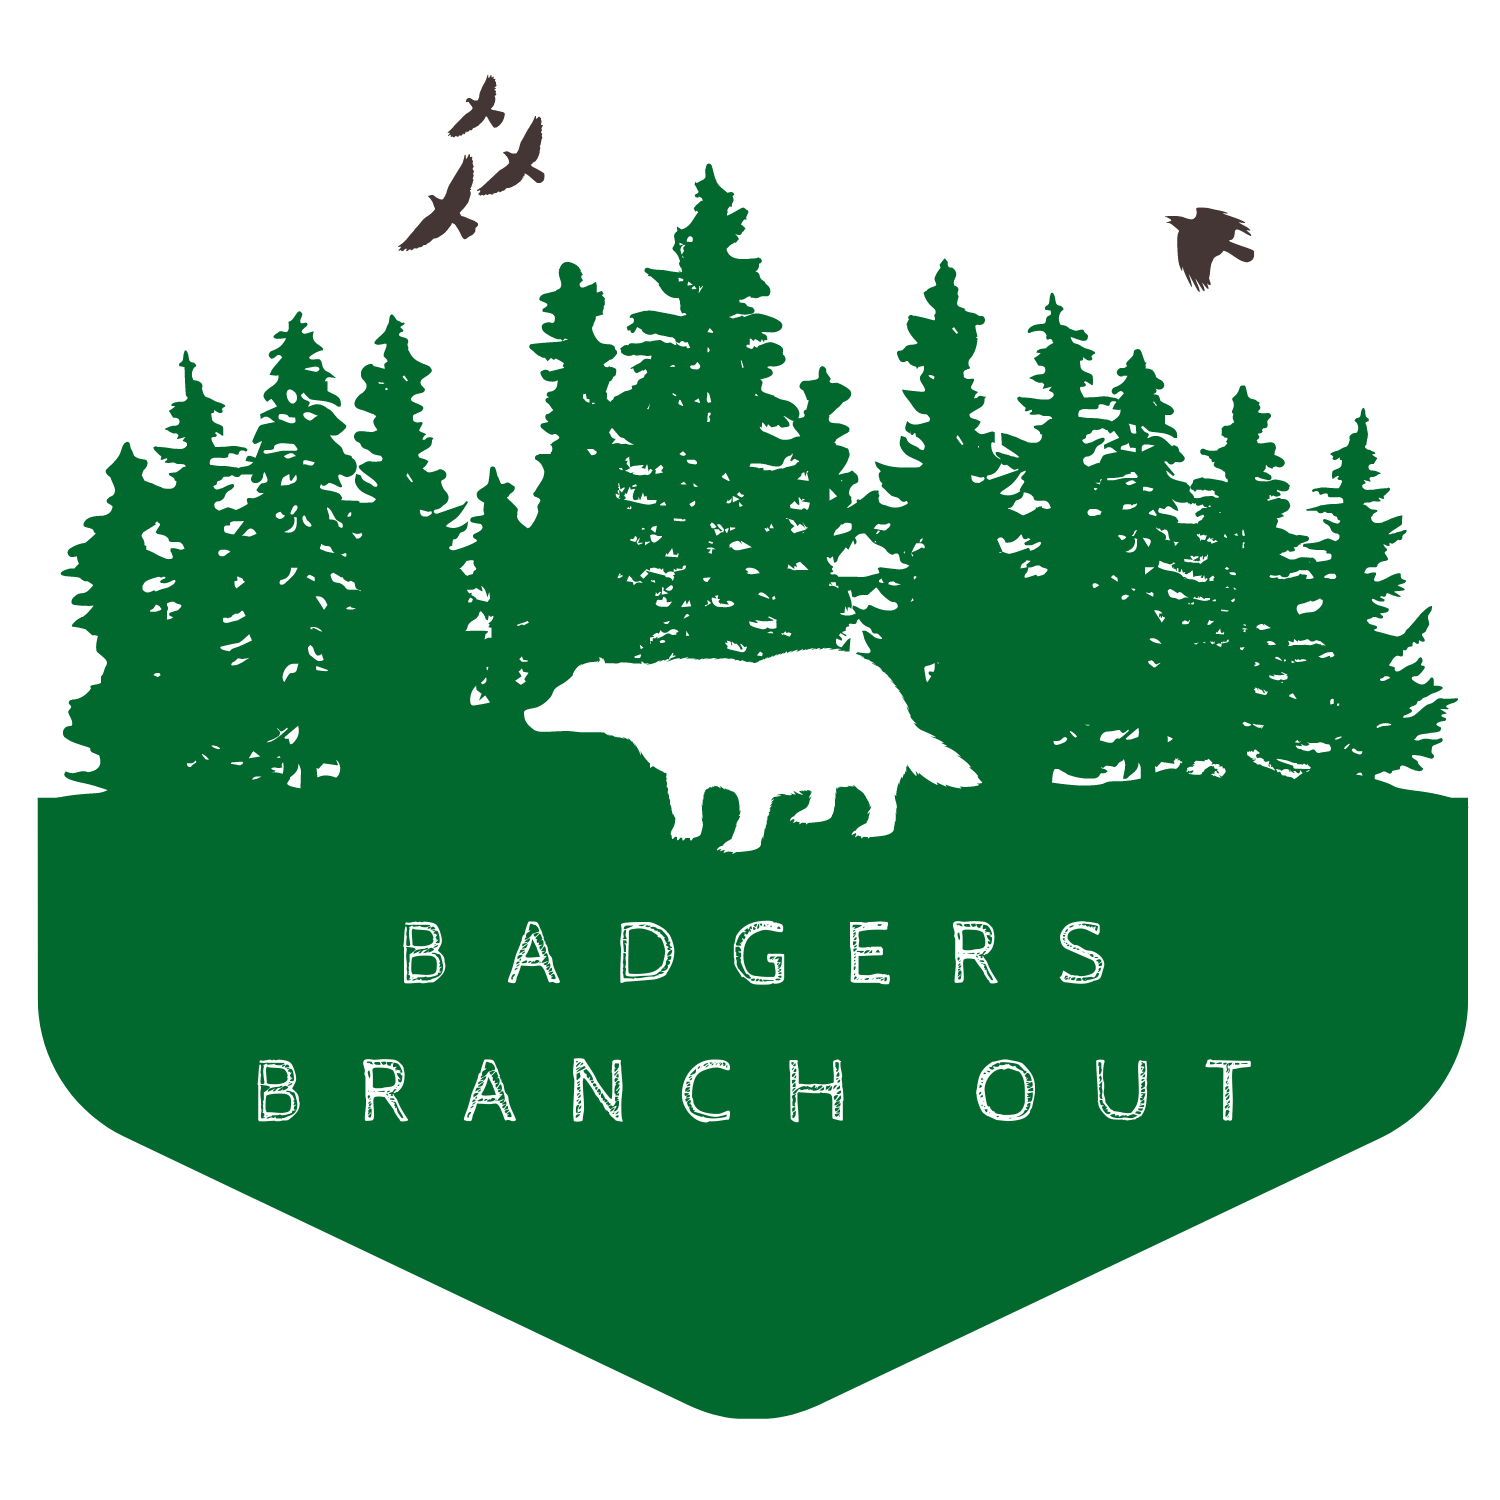 Badgers Branch Out